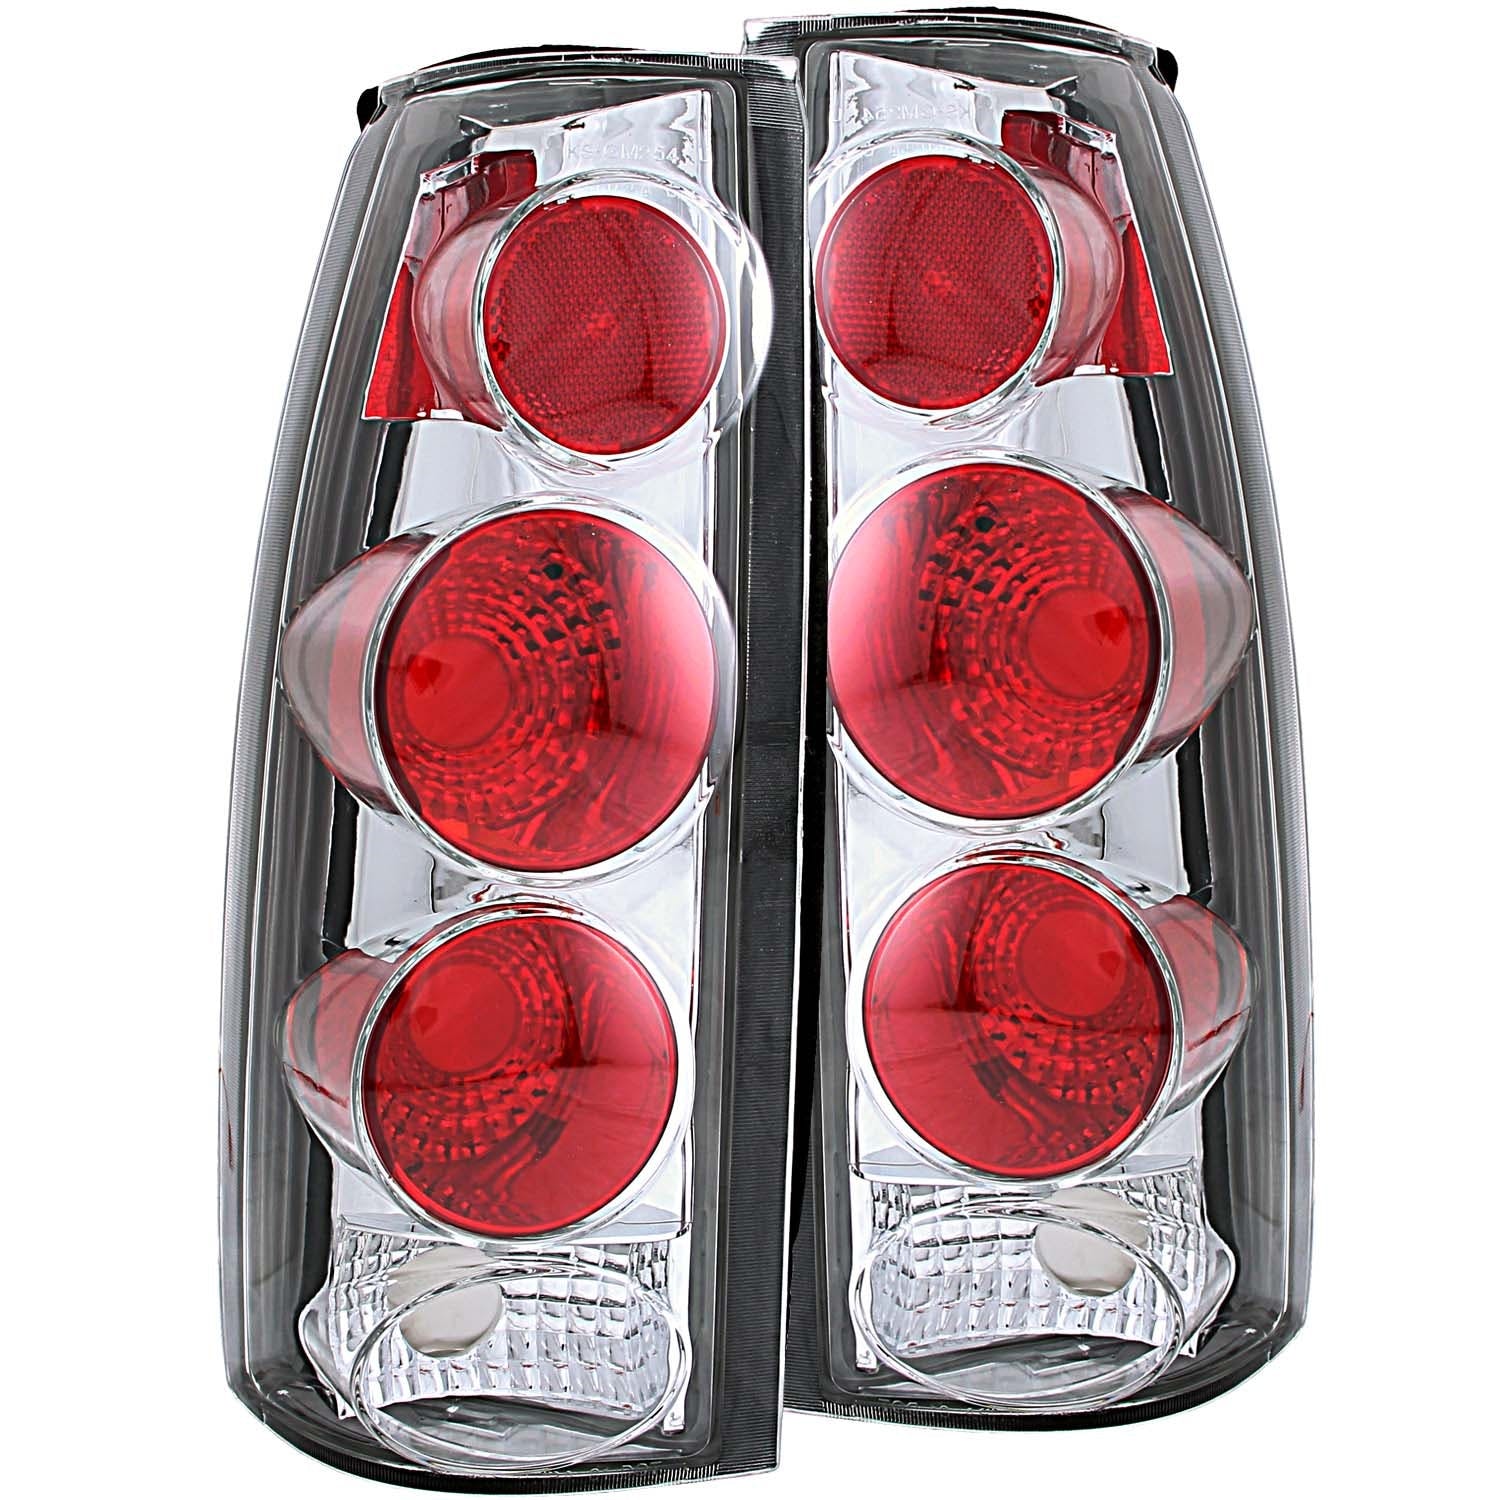 AnzoUSA 211017 Taillights Chrome 3D Style